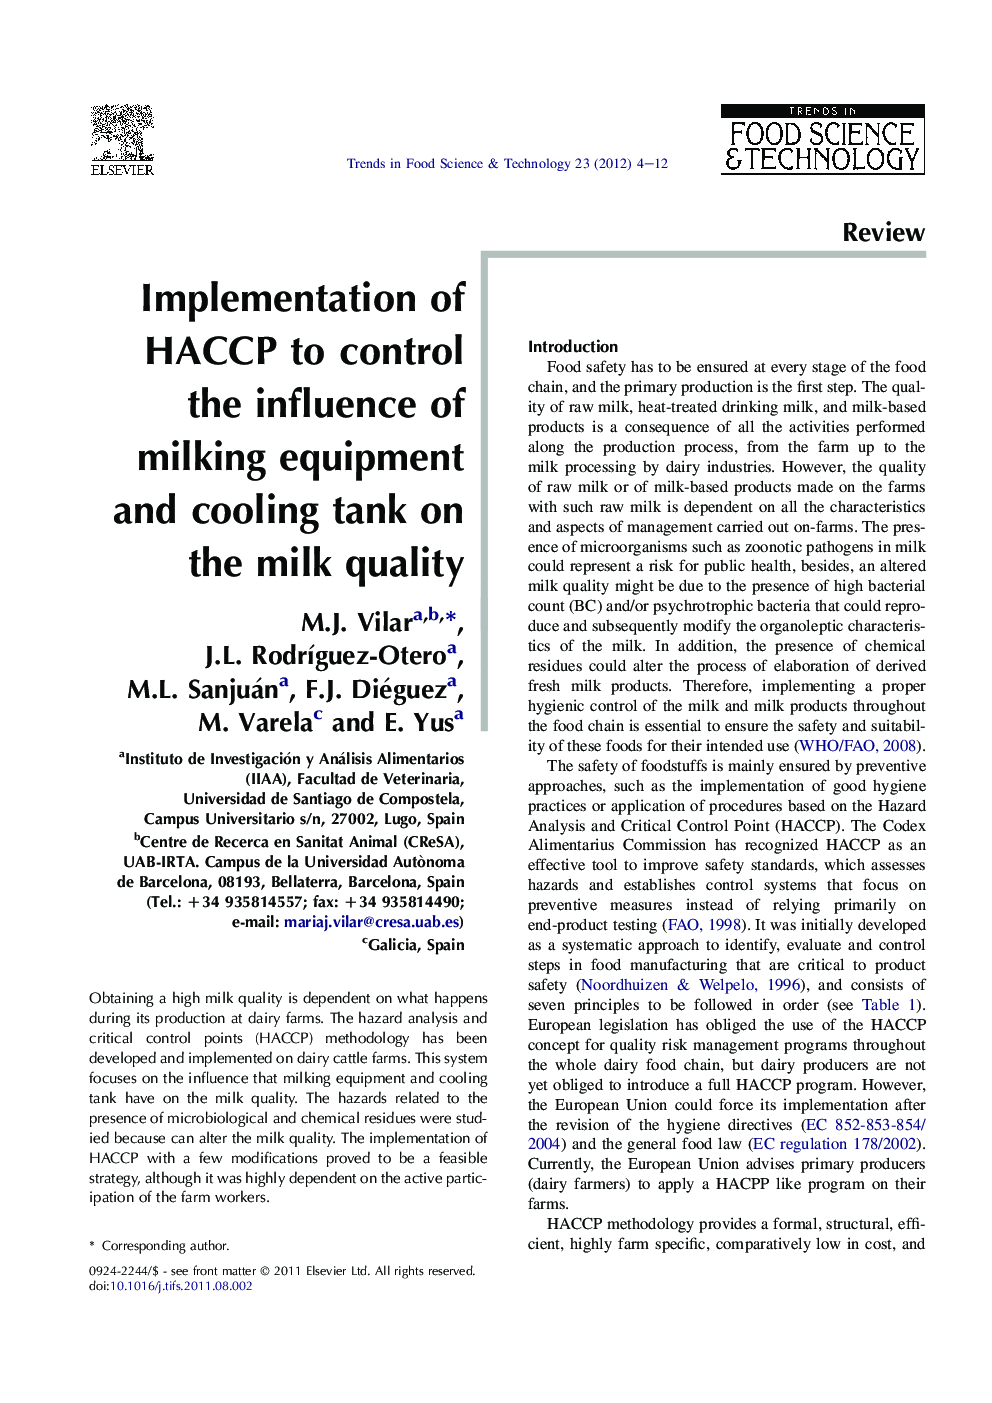 Implementation of HACCP to control the influence of milking equipment and cooling tank on the milk quality